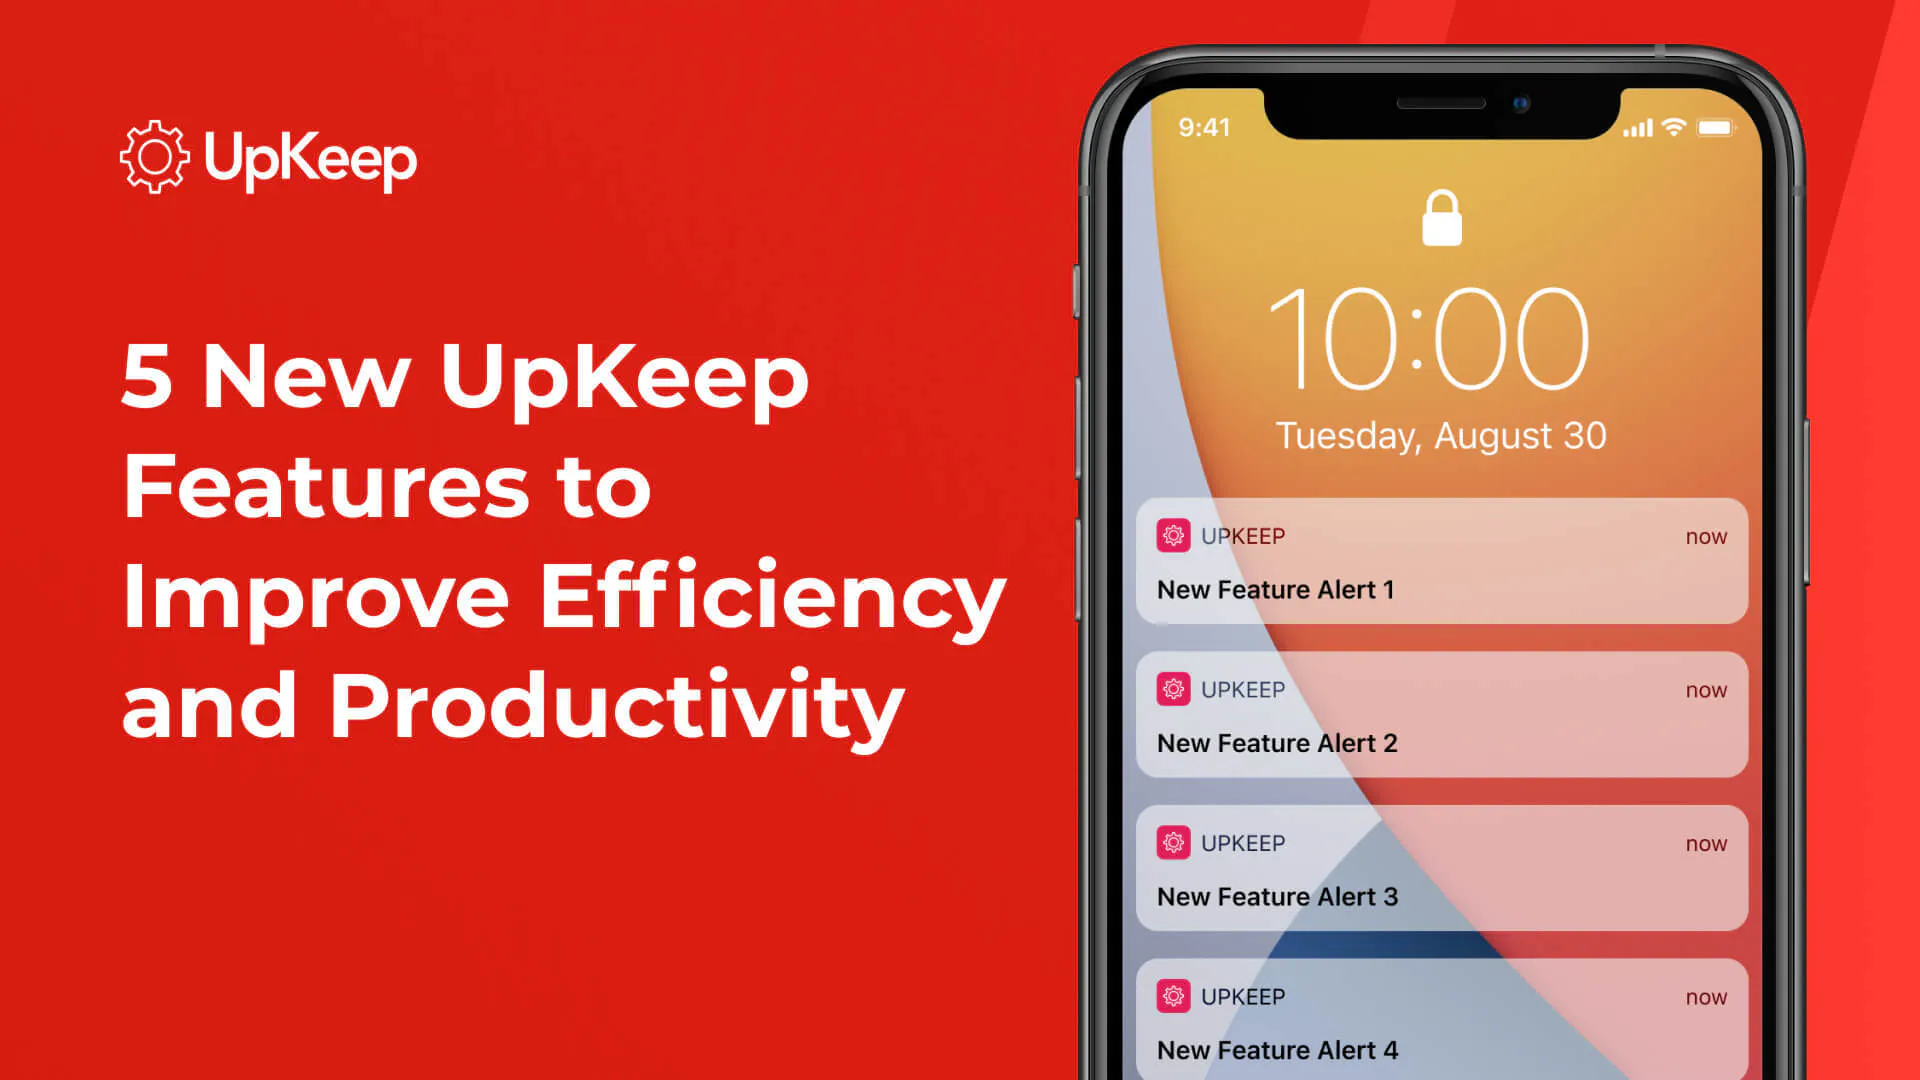 5 New UpKeep Features to Improve Efficiency and Productivity